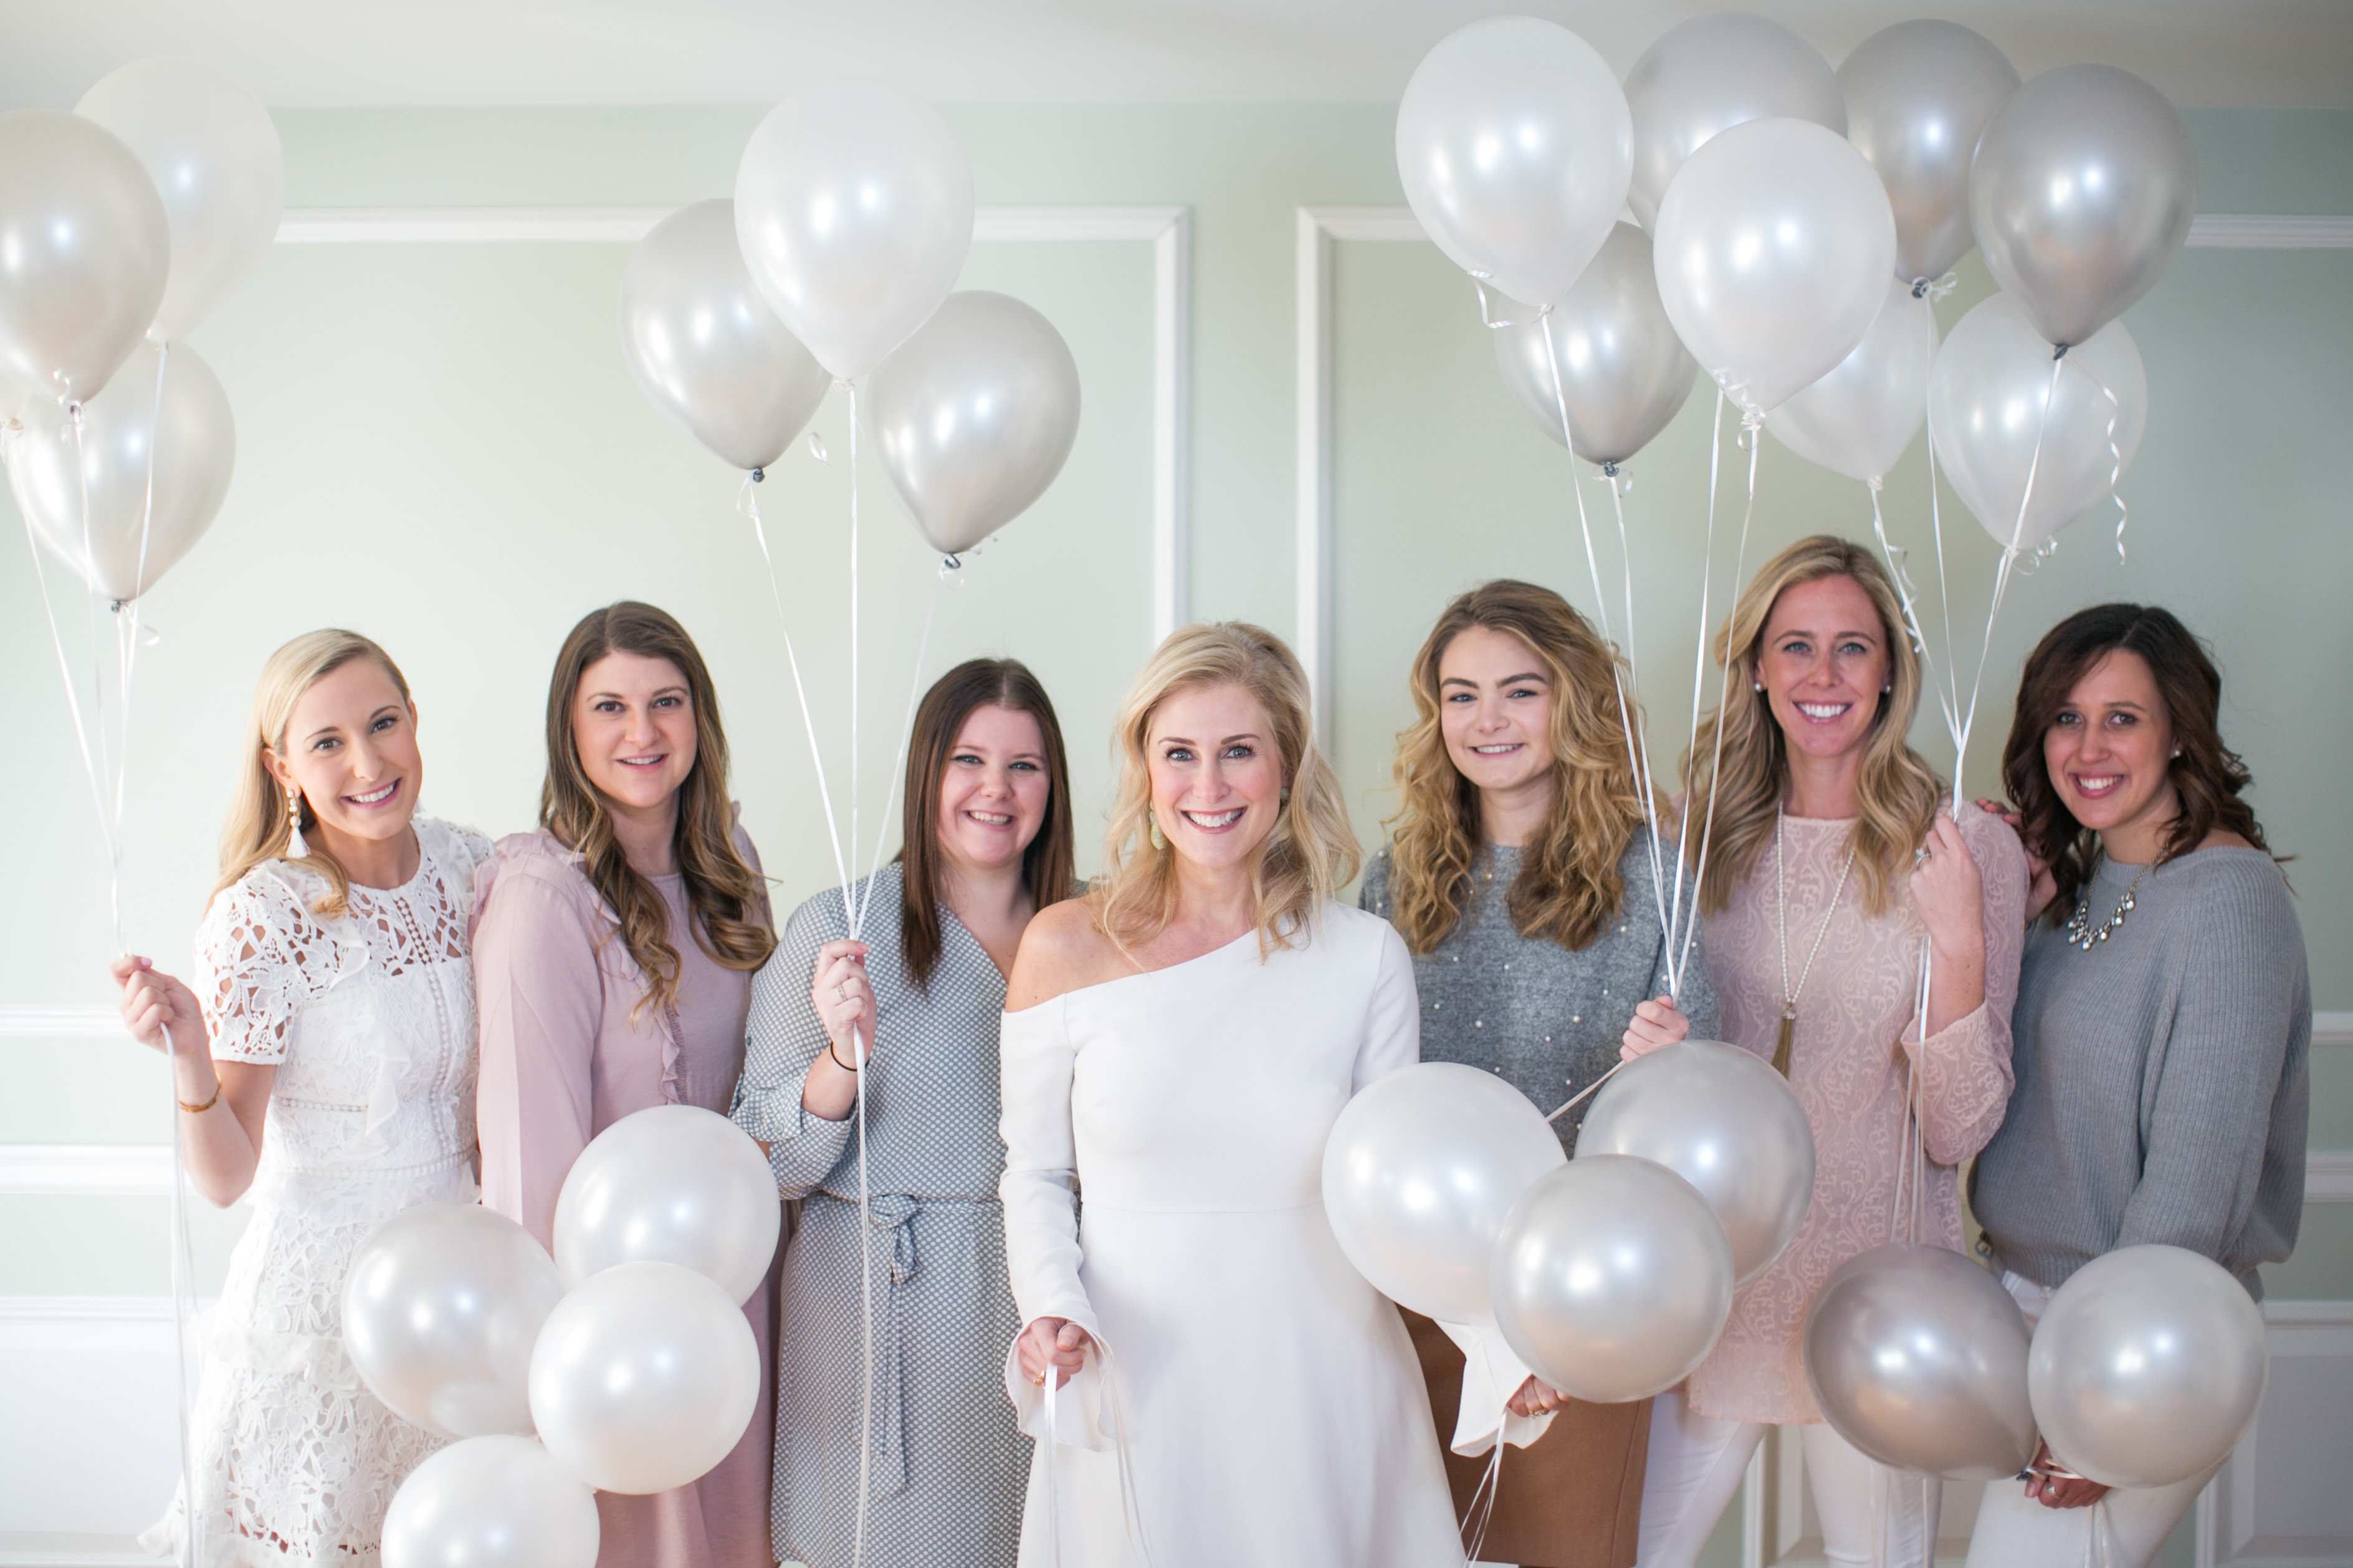 The White Dress by the shore celebrates 14 years of business